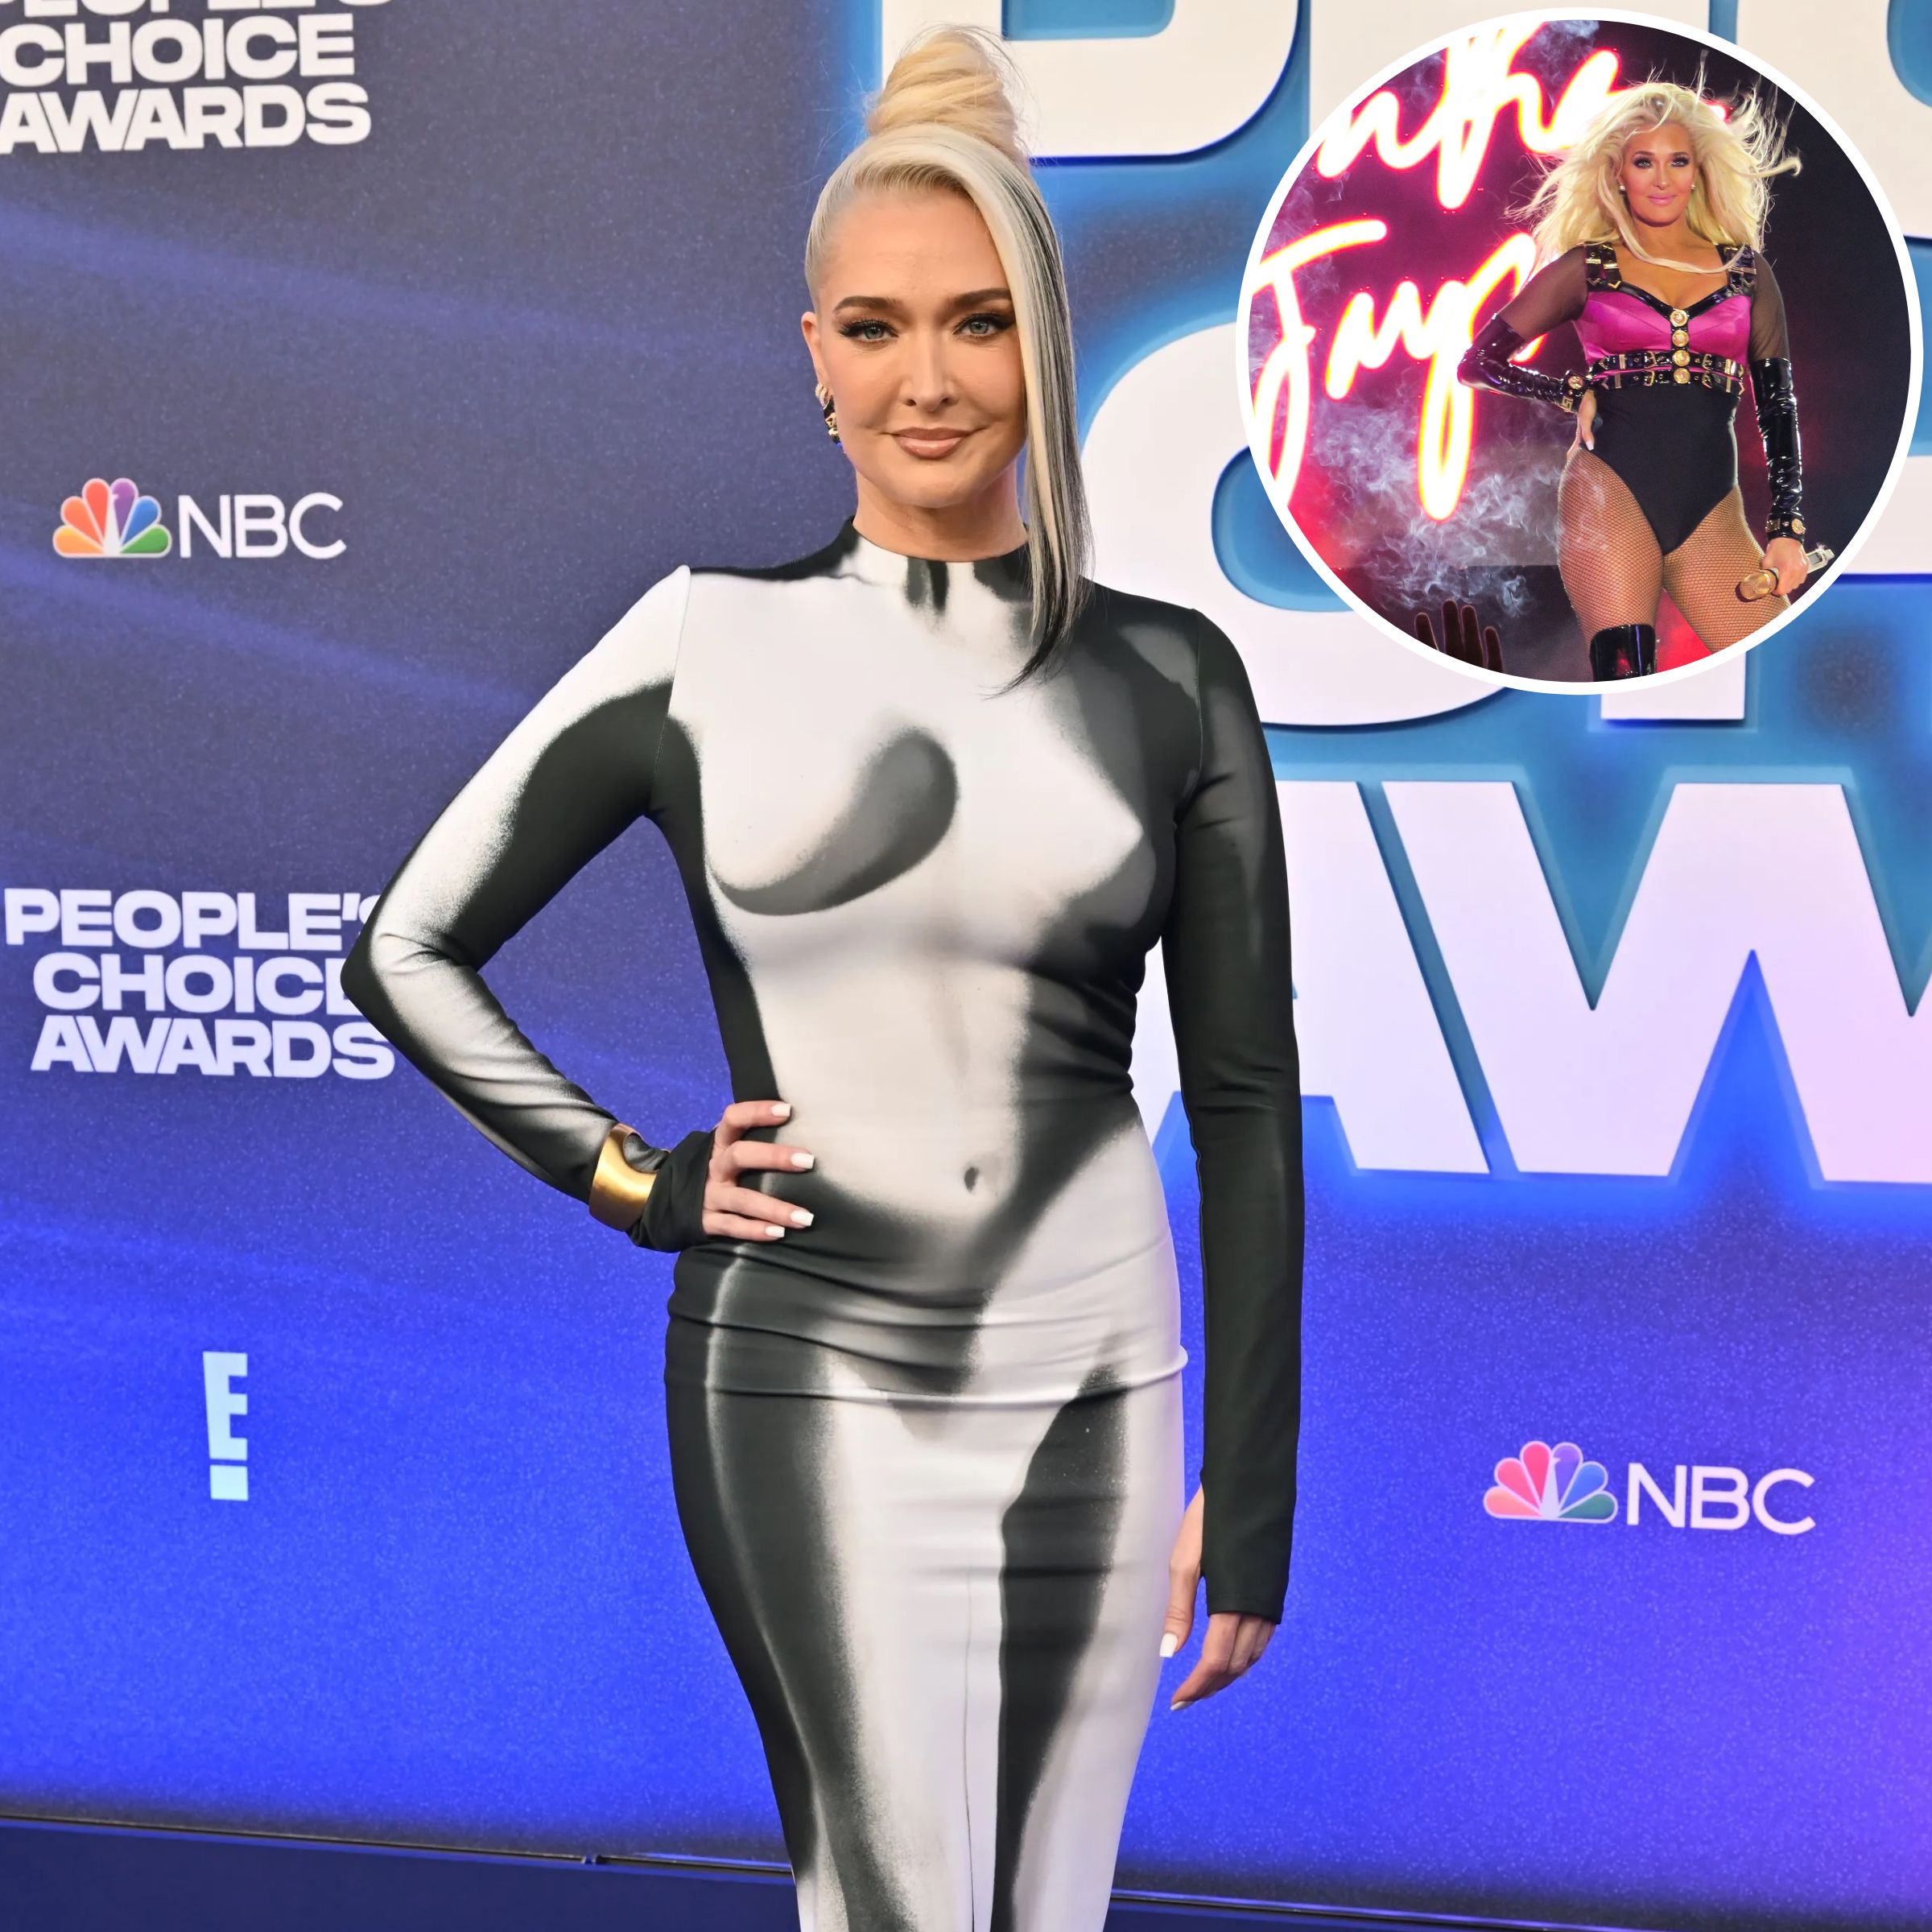 Erika Jayne Sexiest Outfits Braless, Sheer Fashion Photos pic picture